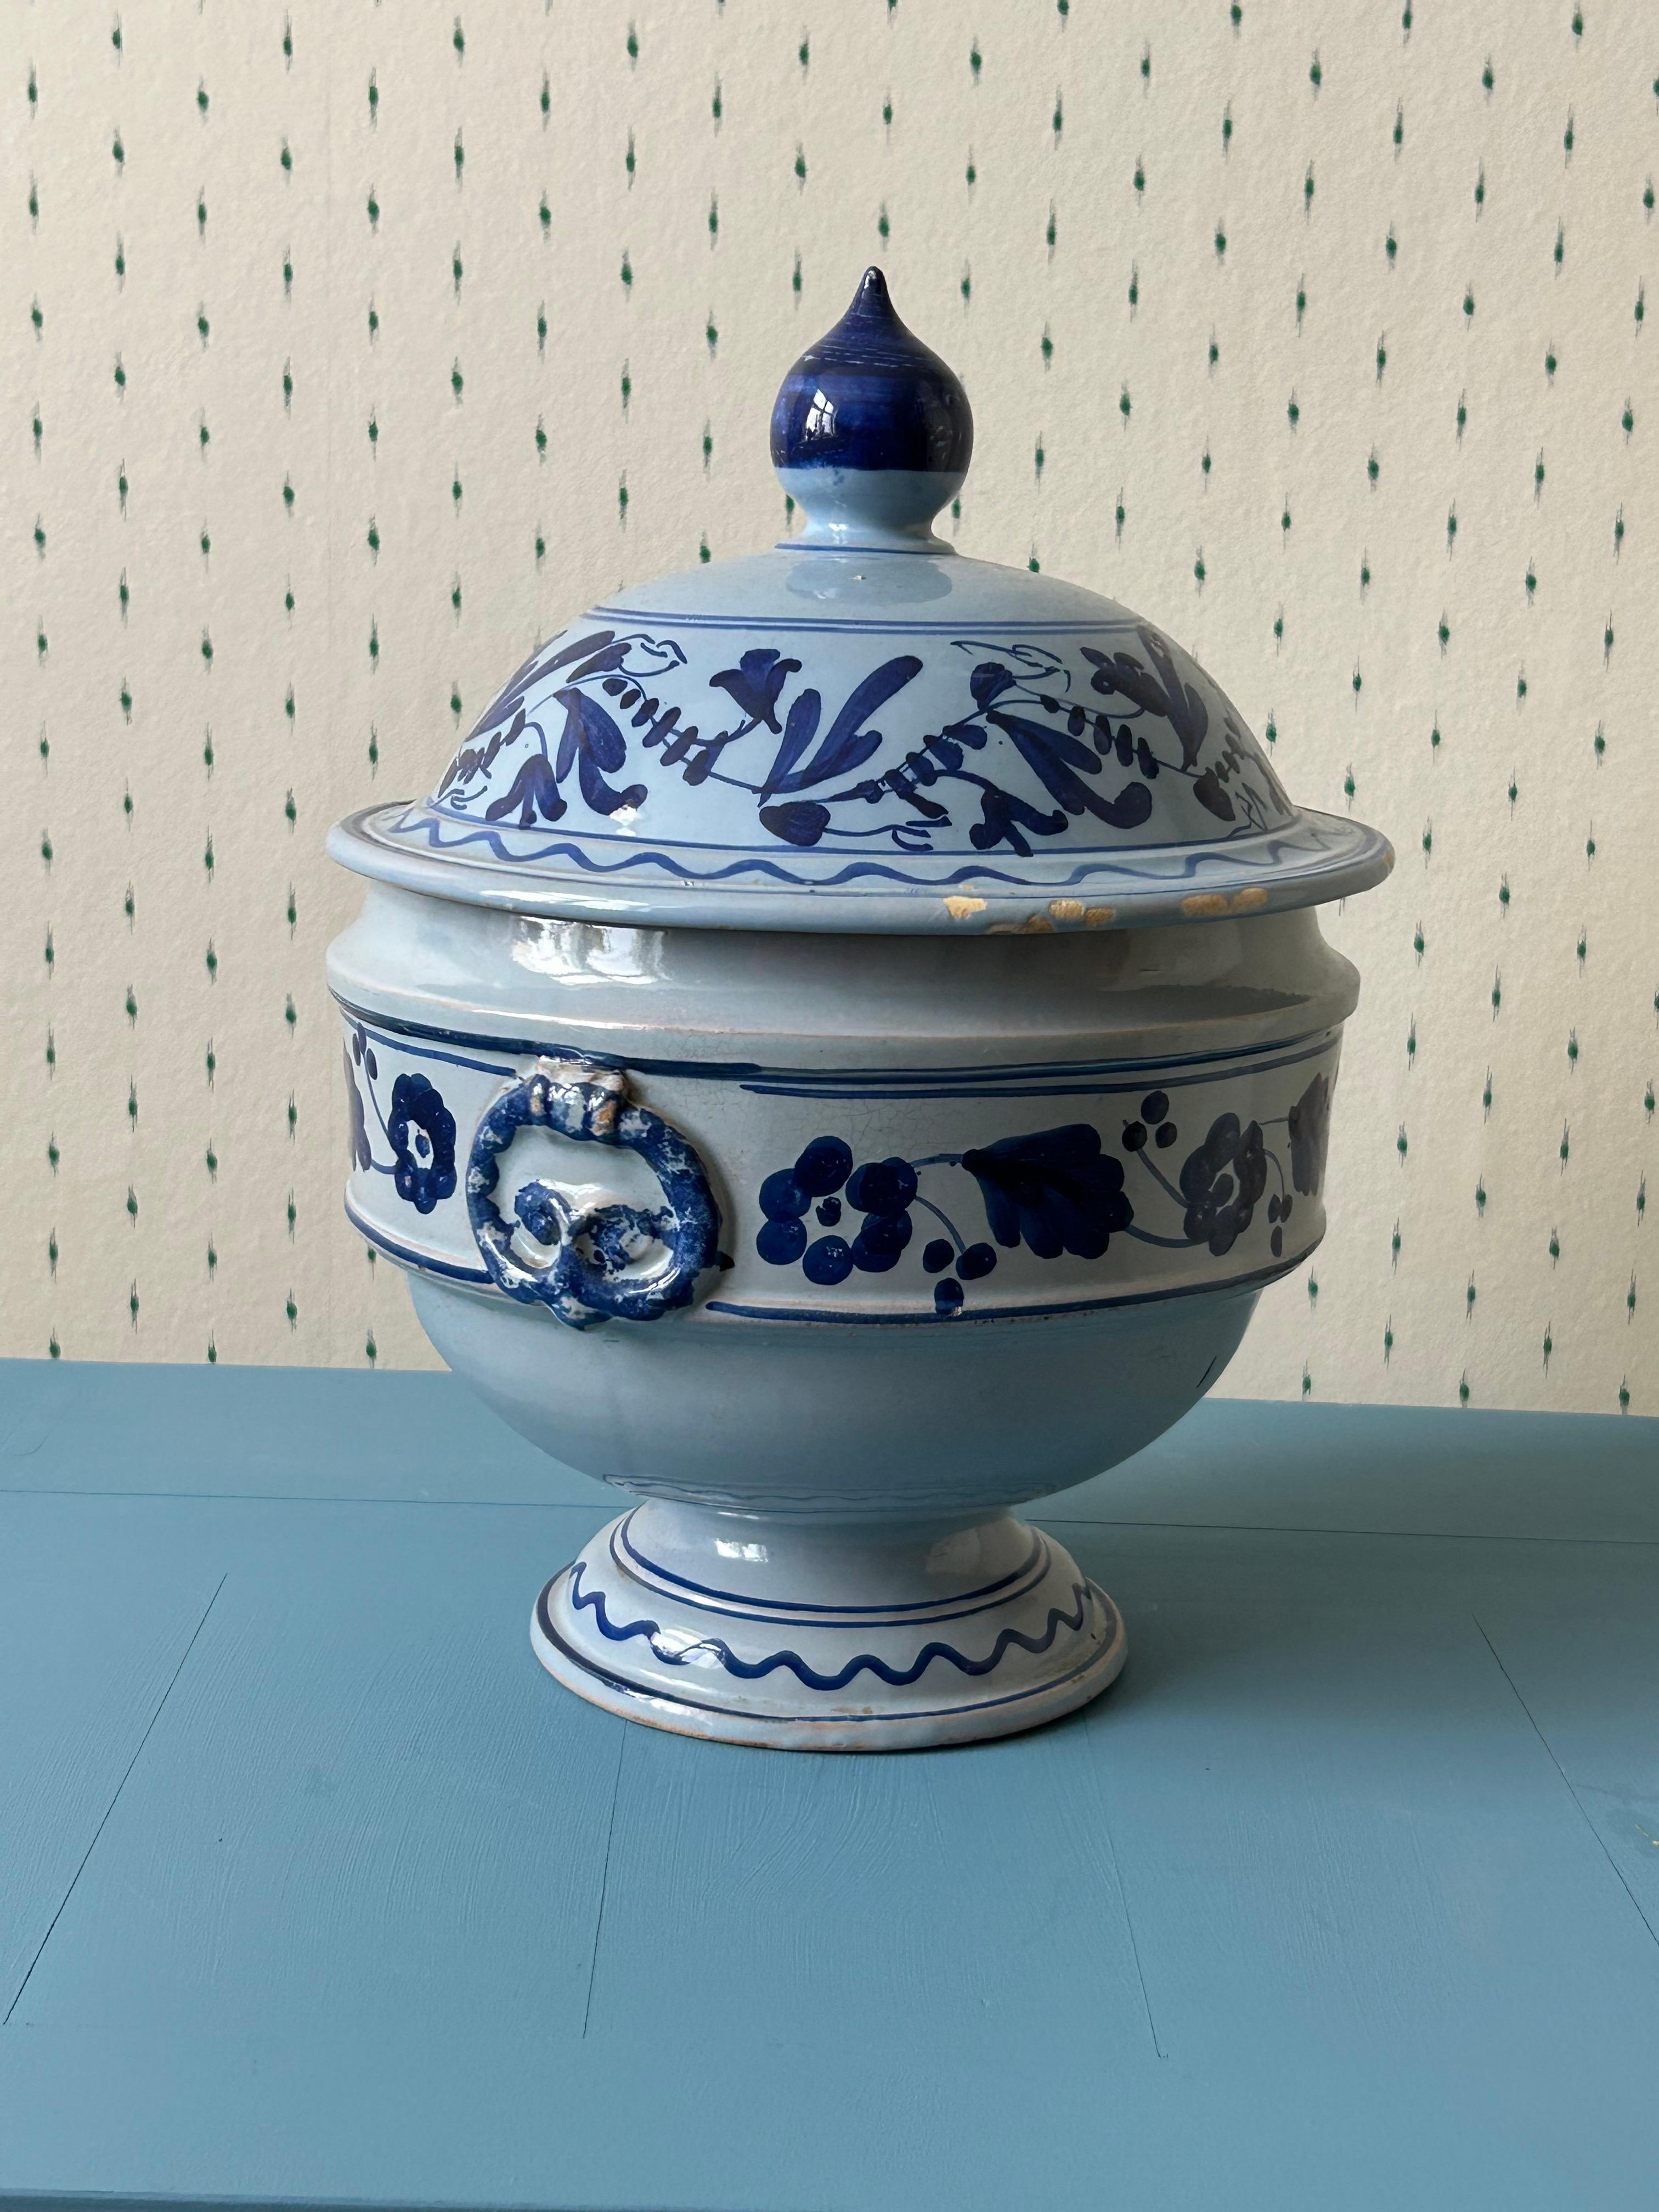 19th Century Vintage Ceramic Tureens with Blue Flower Decorations, Italy, Late 19th-Century For Sale